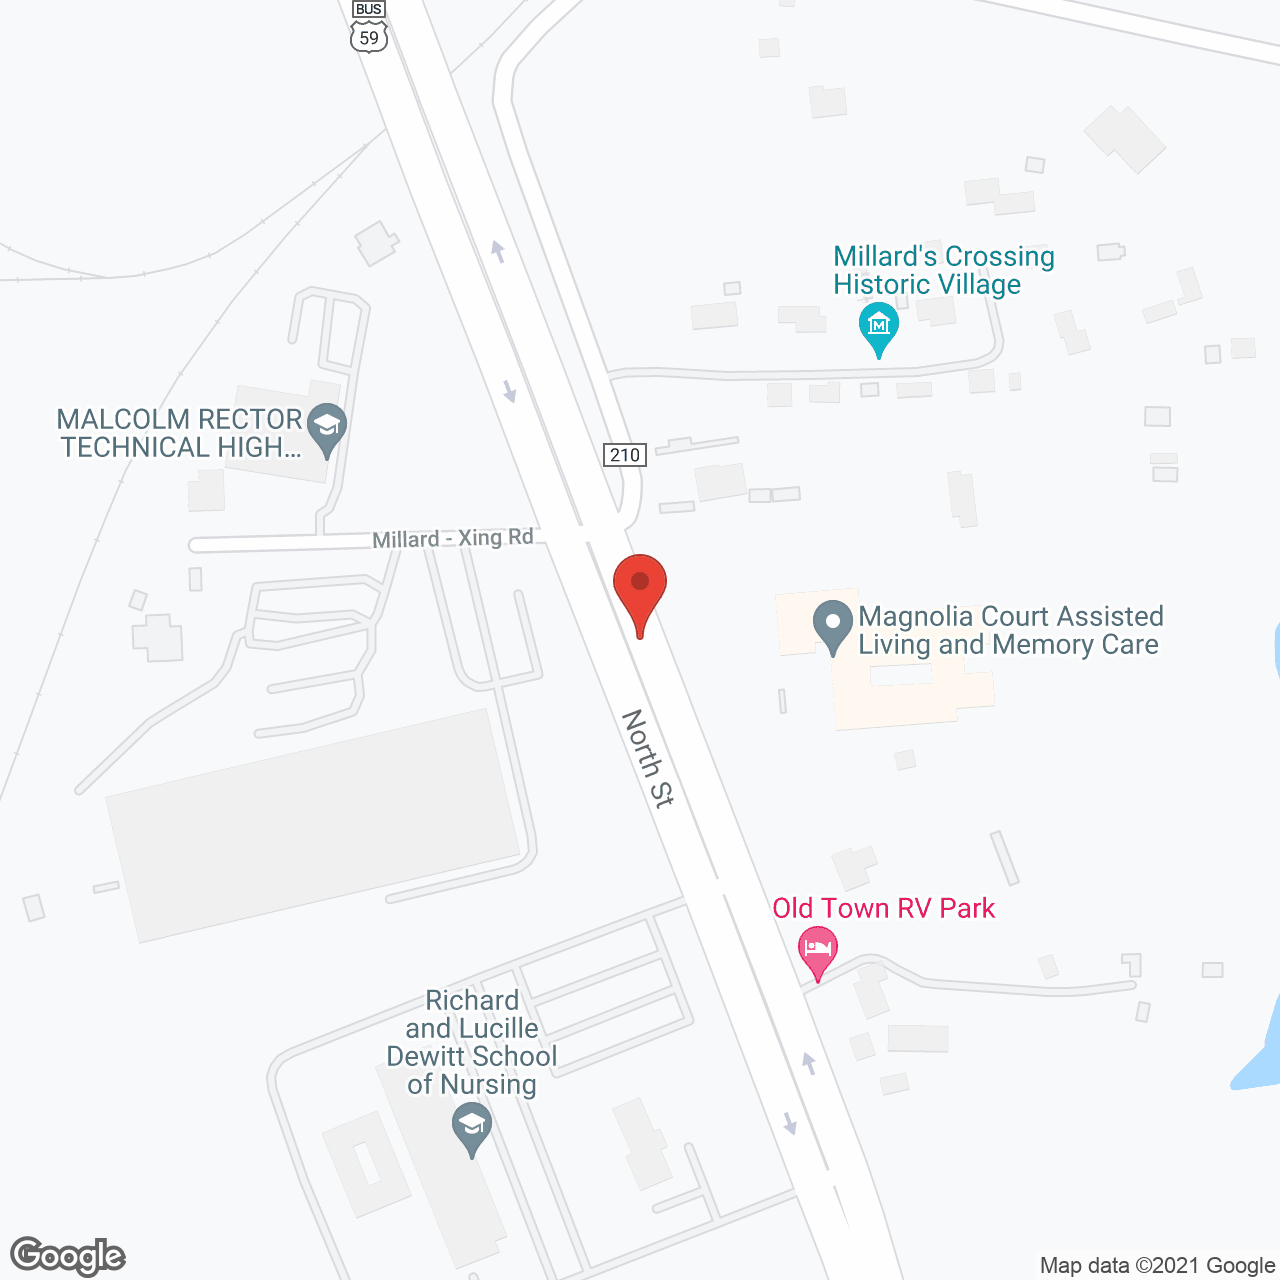 Magnolia Court Assisted Living and Memory Care in google map